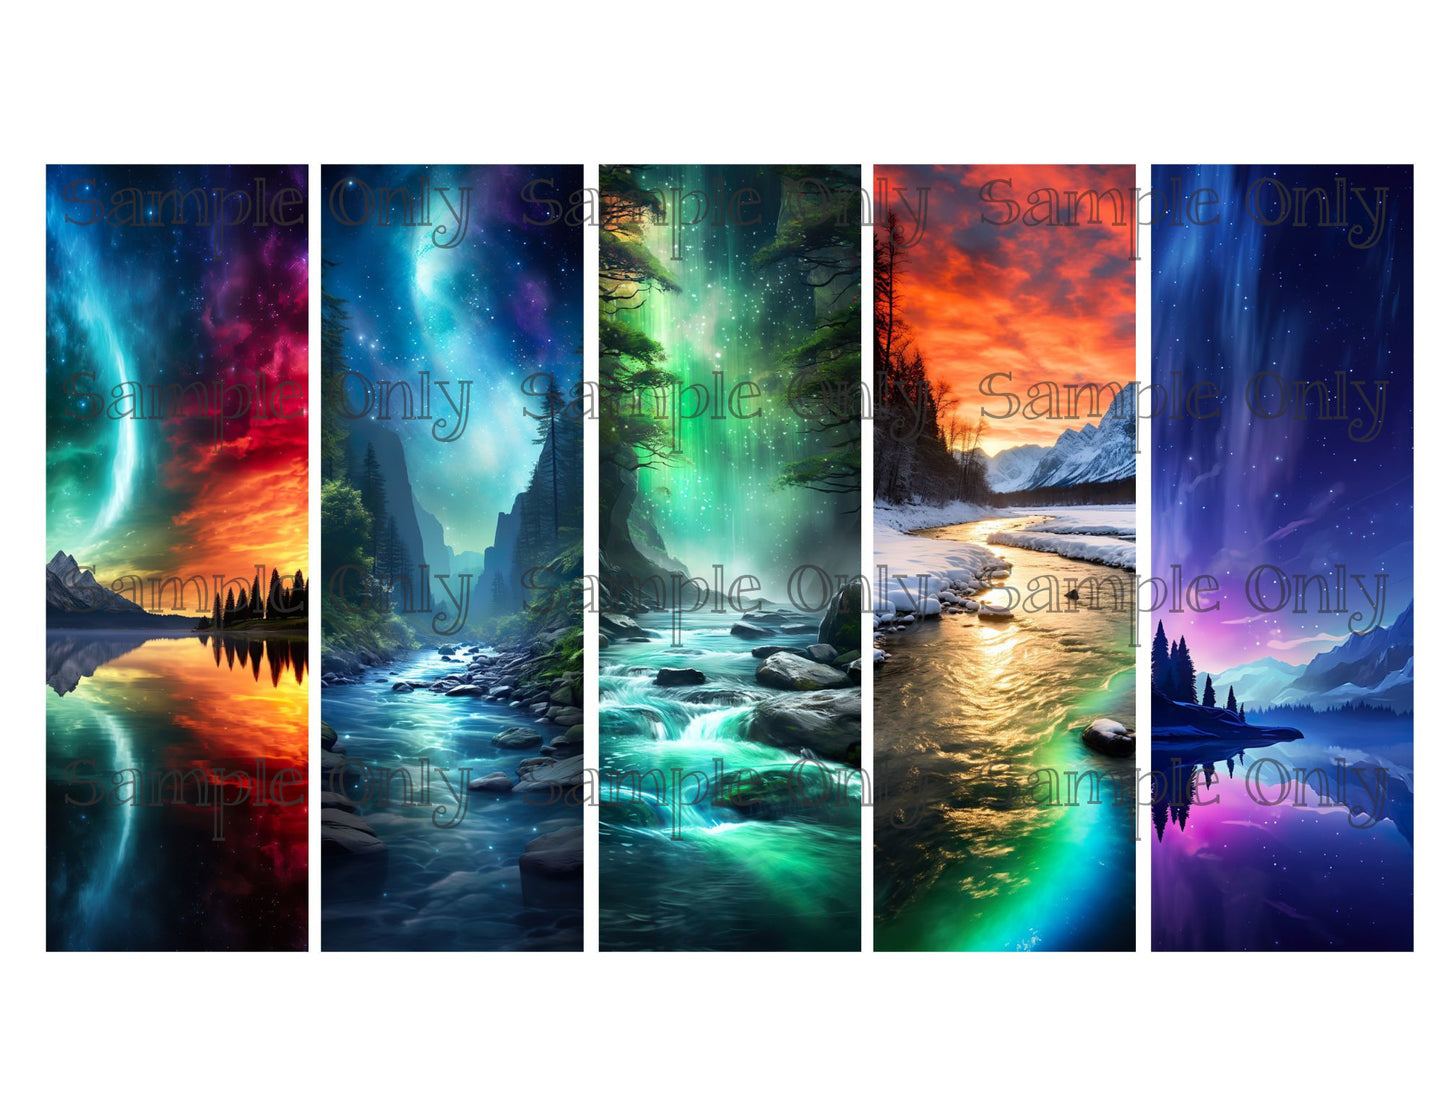 Aurora Borealis Scenes Bookmark Set 01 Printed Water Soluble Image Transfer Sheet For Polymer Clay